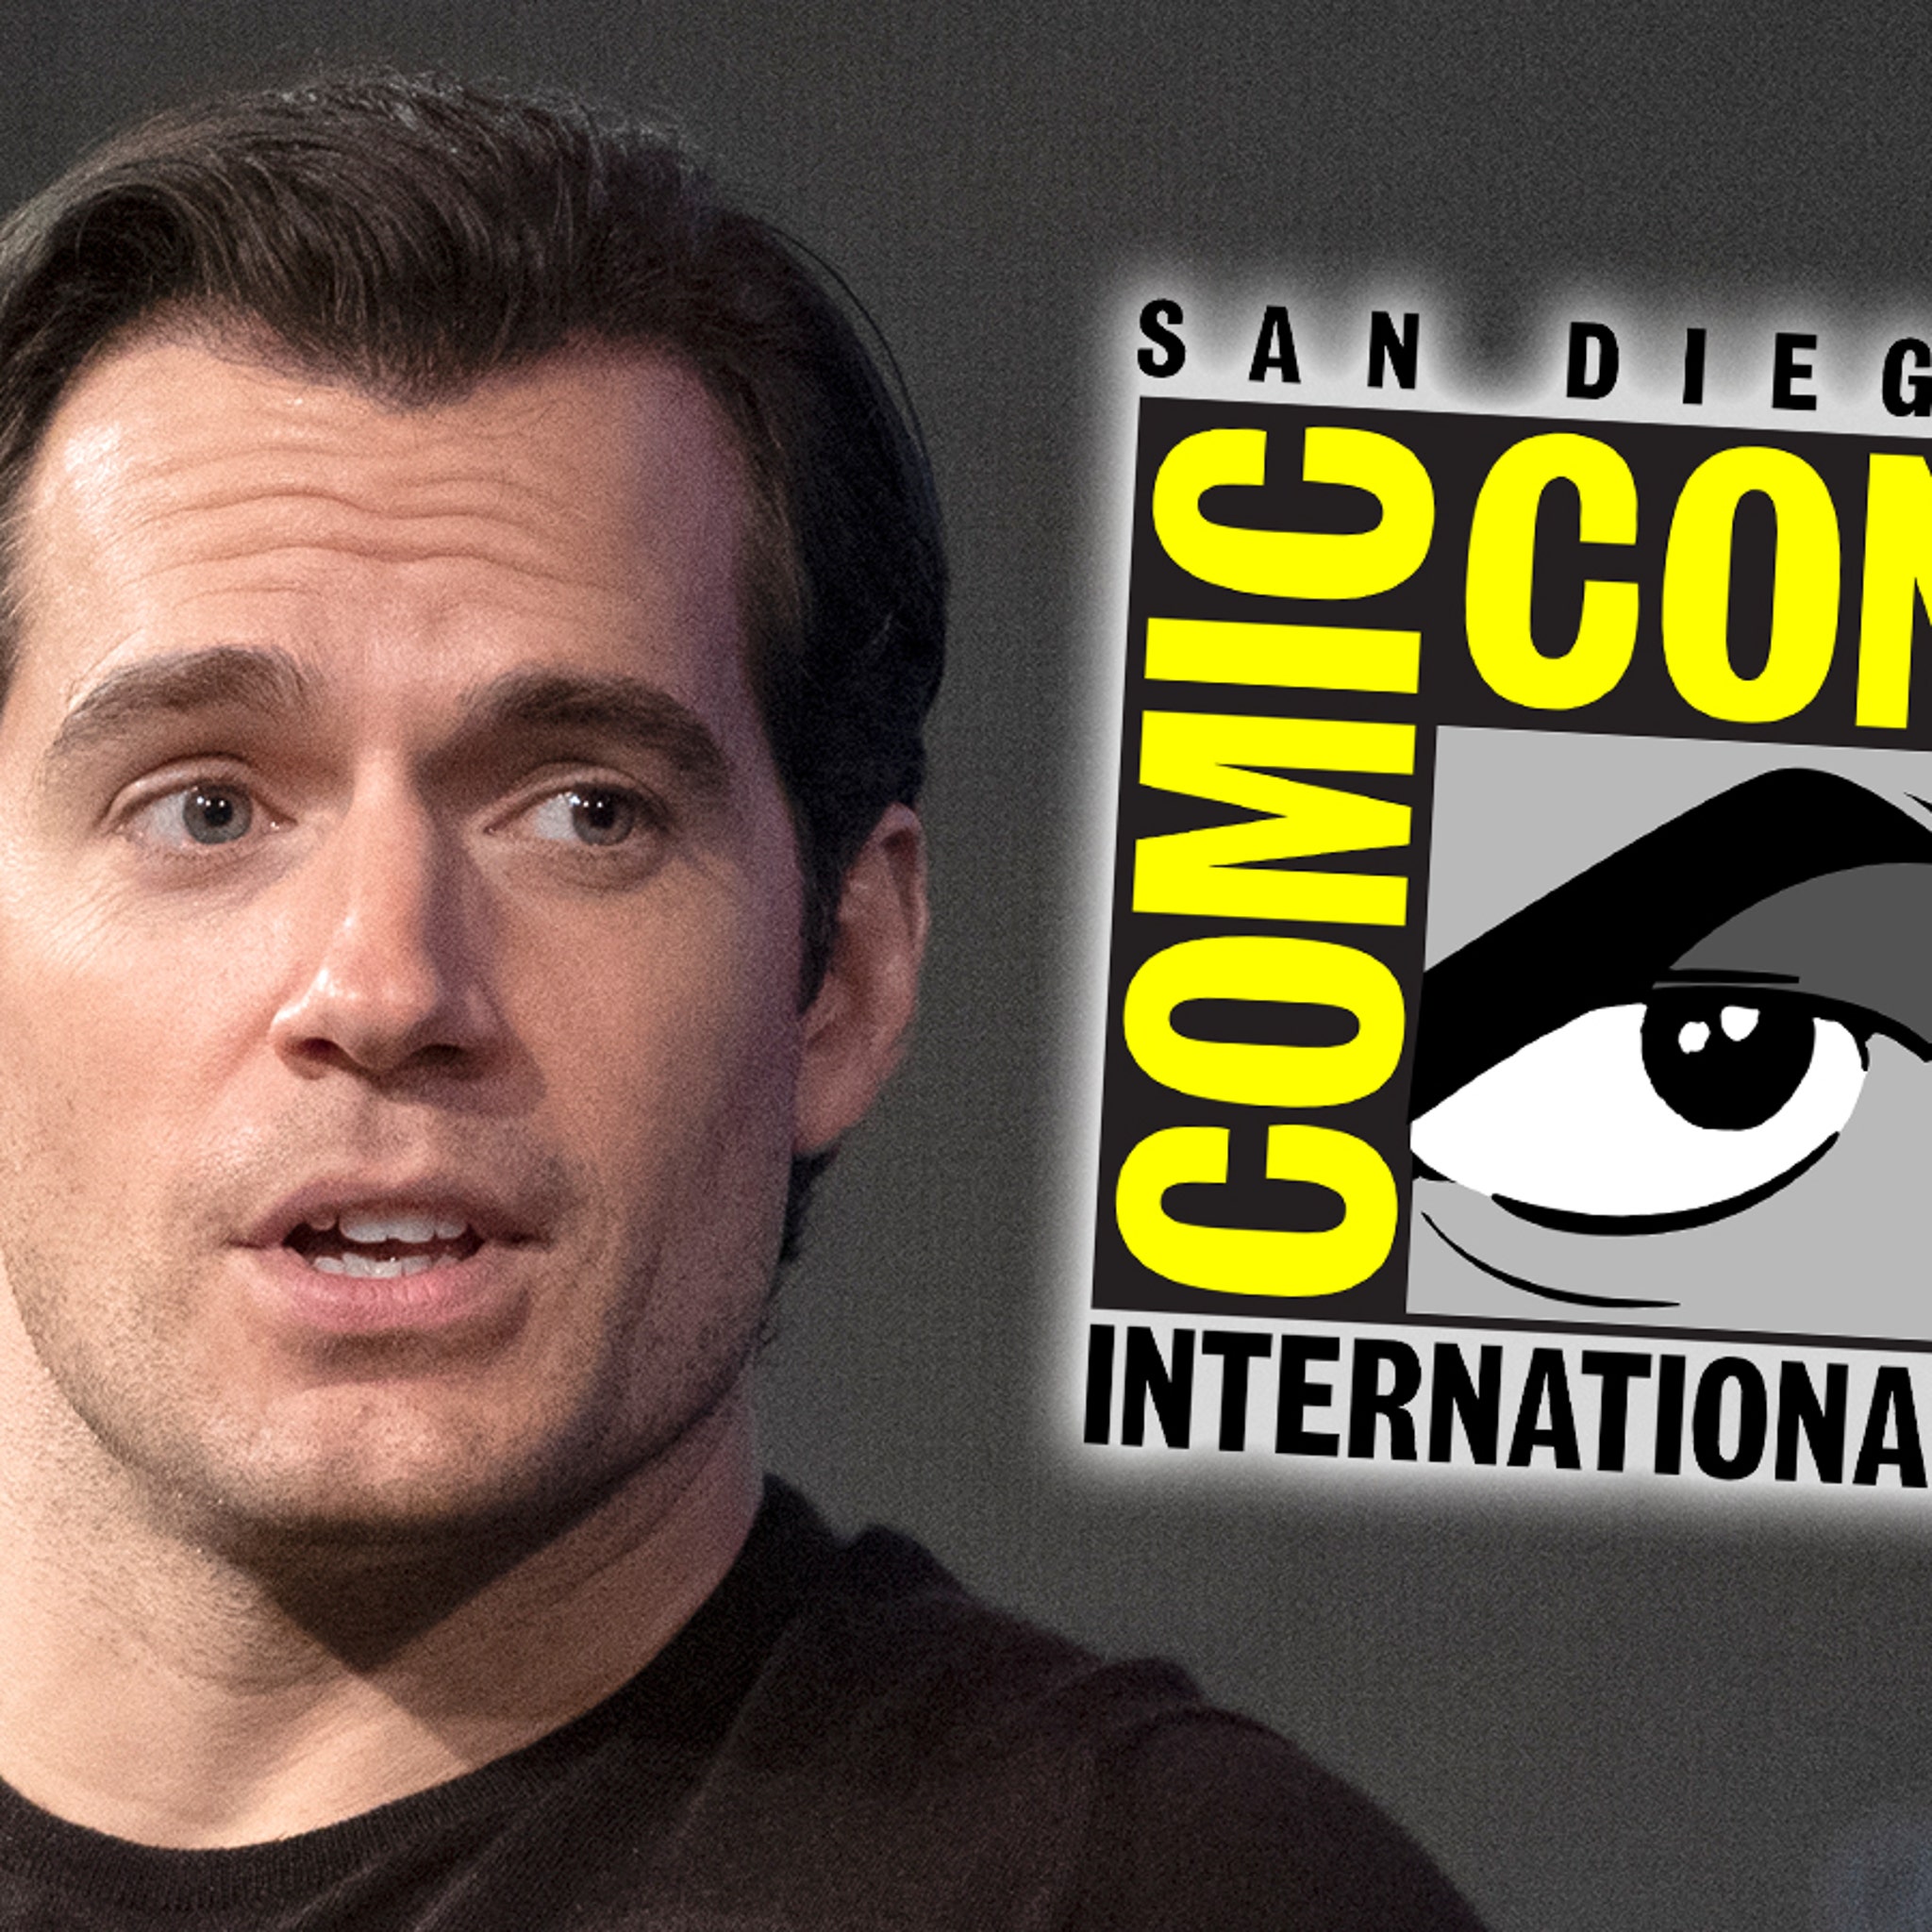 Fact or Fiction: Henry Cavill signs up for 3 Superman films and more Reel  360 News